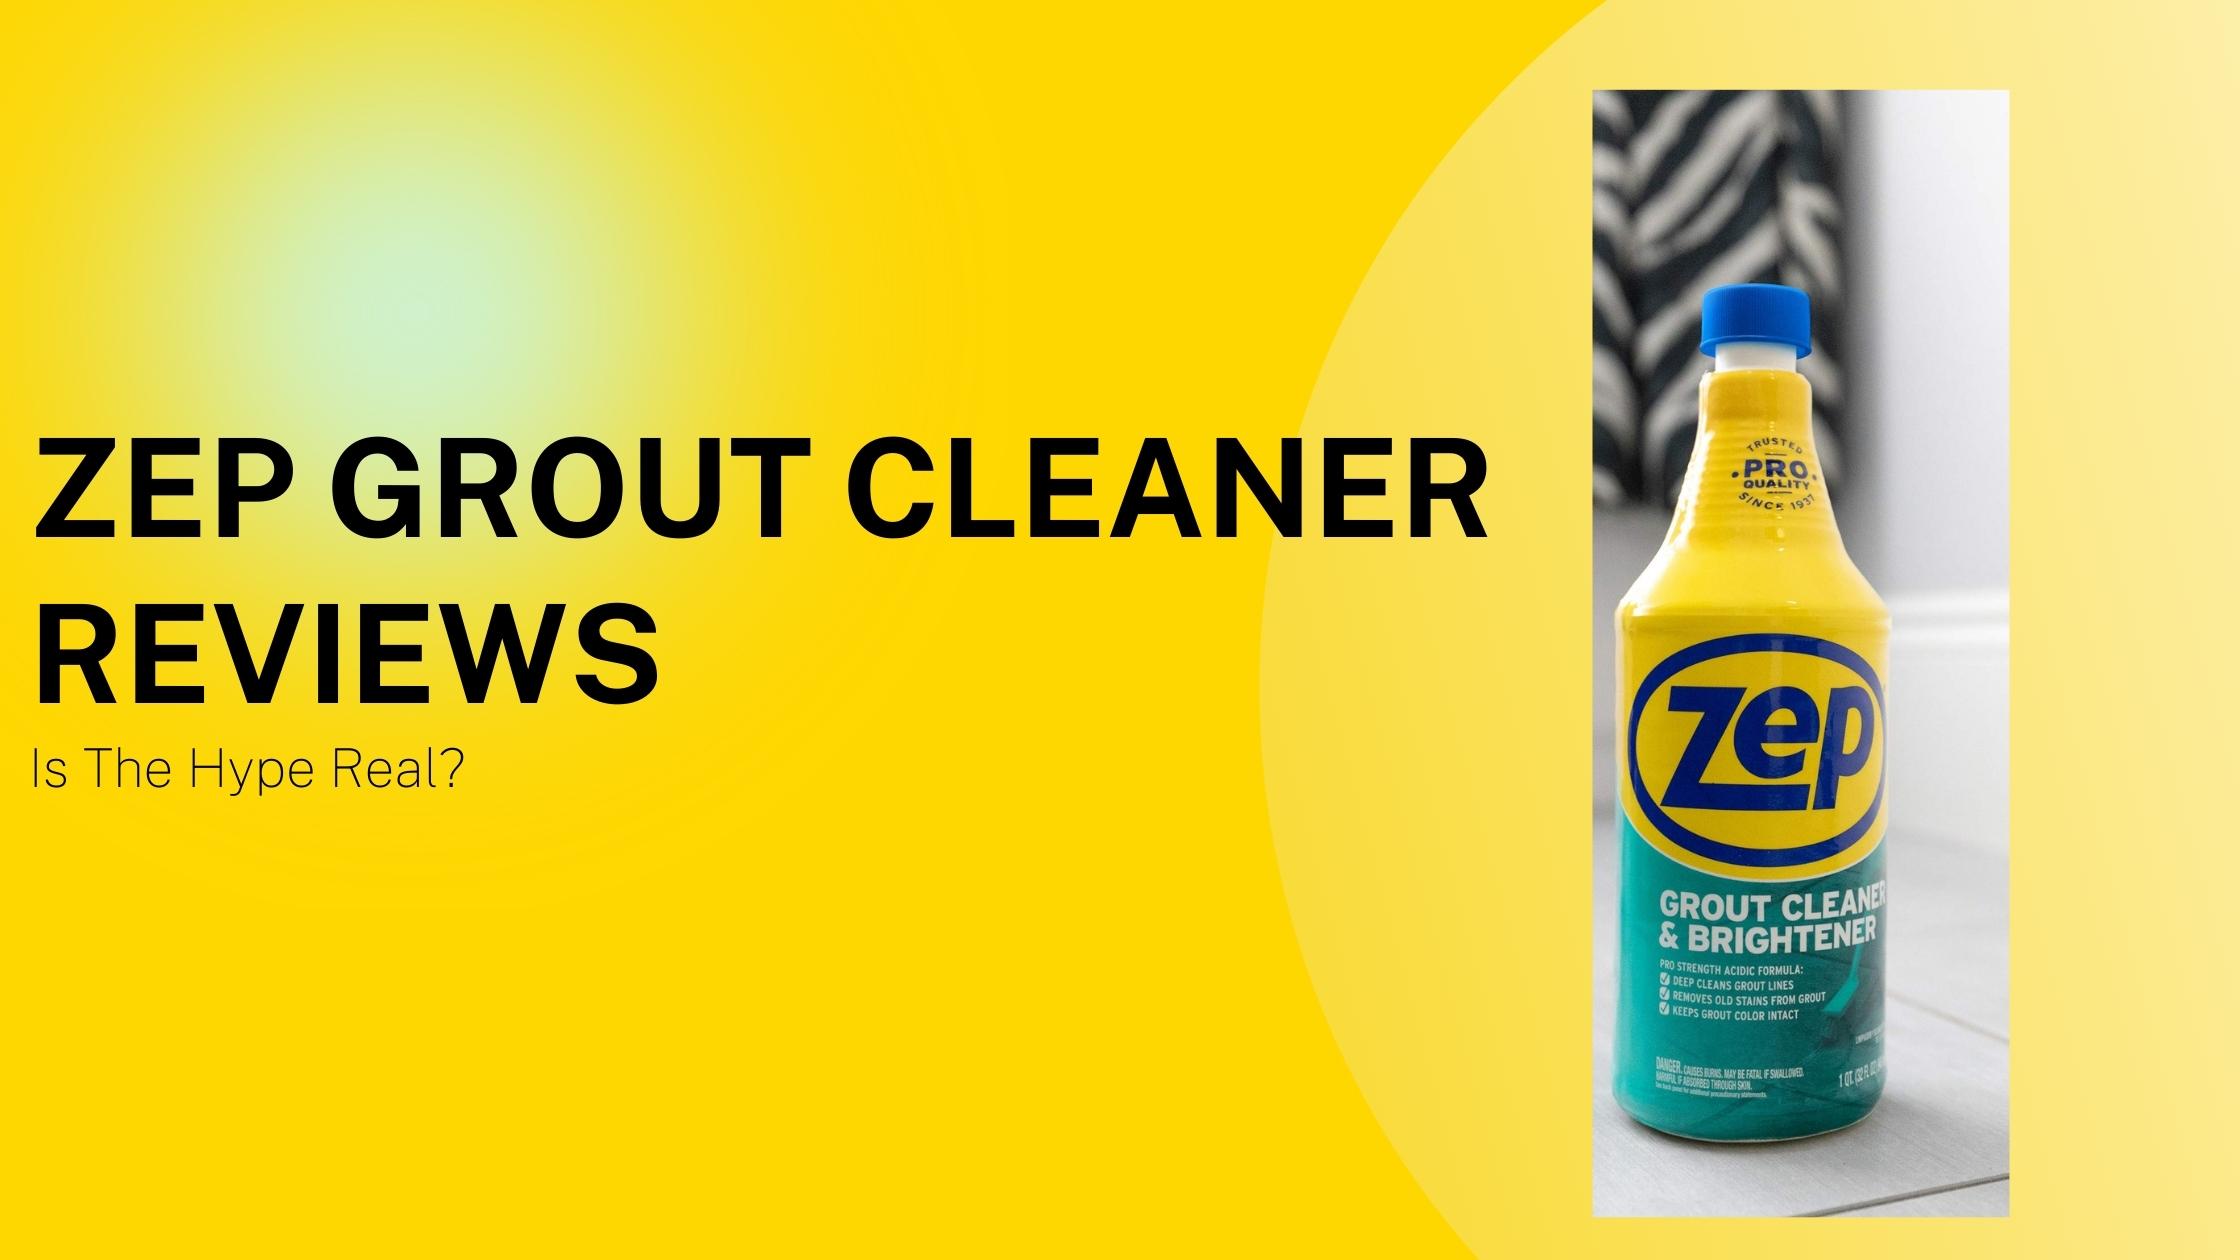 Zep Grout Cleaner Reviews: Is The Hype Real?